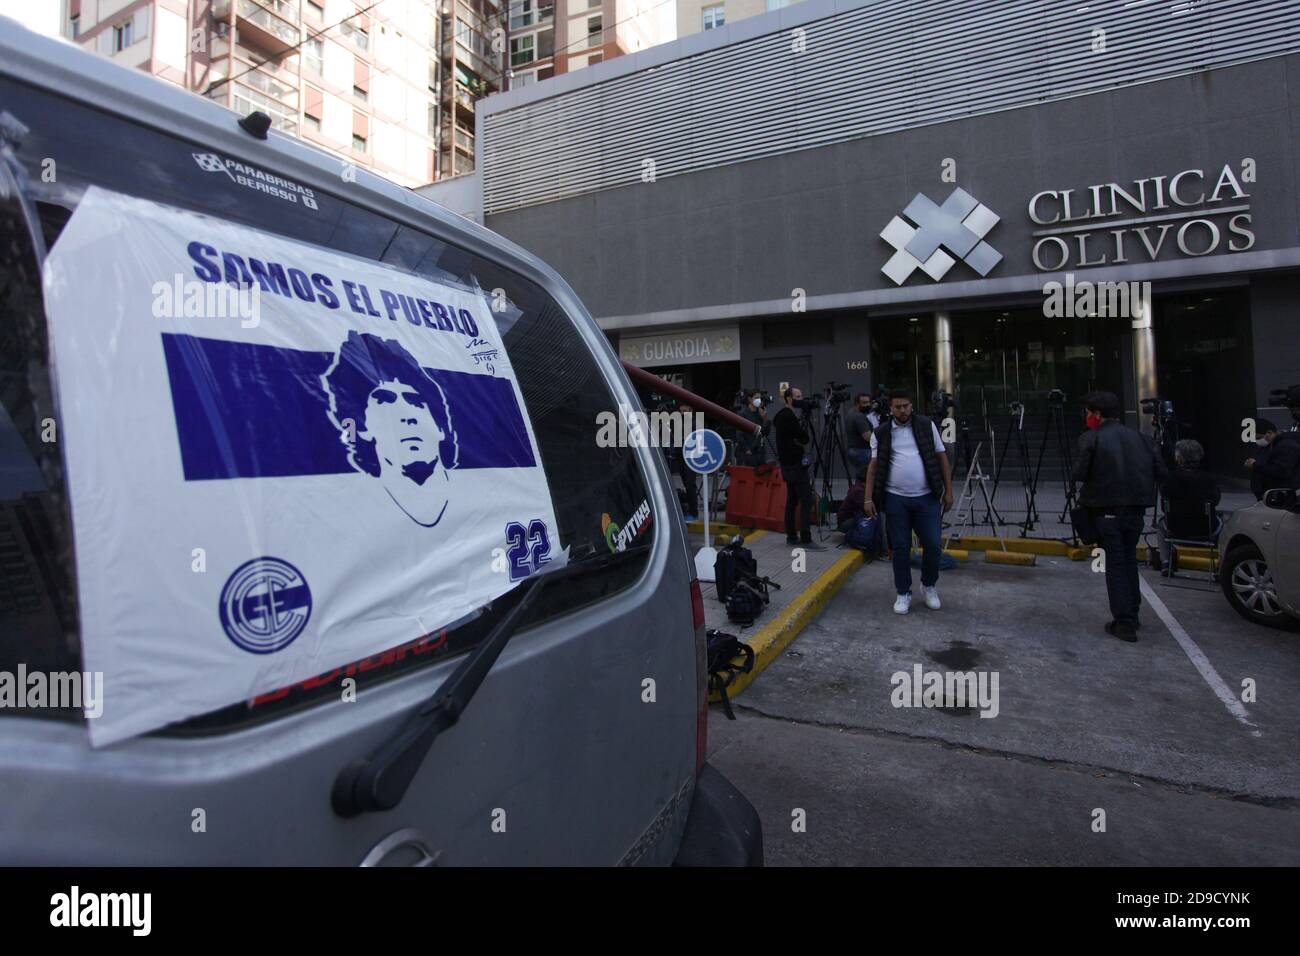 Buenos Aires, Buenos Aires, Argentina. 4th Nov, 2020. Diego Armando Maradona remains hospitalized at the Olivos clinic after having been operated on for a subdural hematoma.Several fans of the idol gathered at the door of the clinic to give him their support and start a vigil. Credit: Carol Smiljan/ZUMA Wire/Alamy Live News Stock Photo